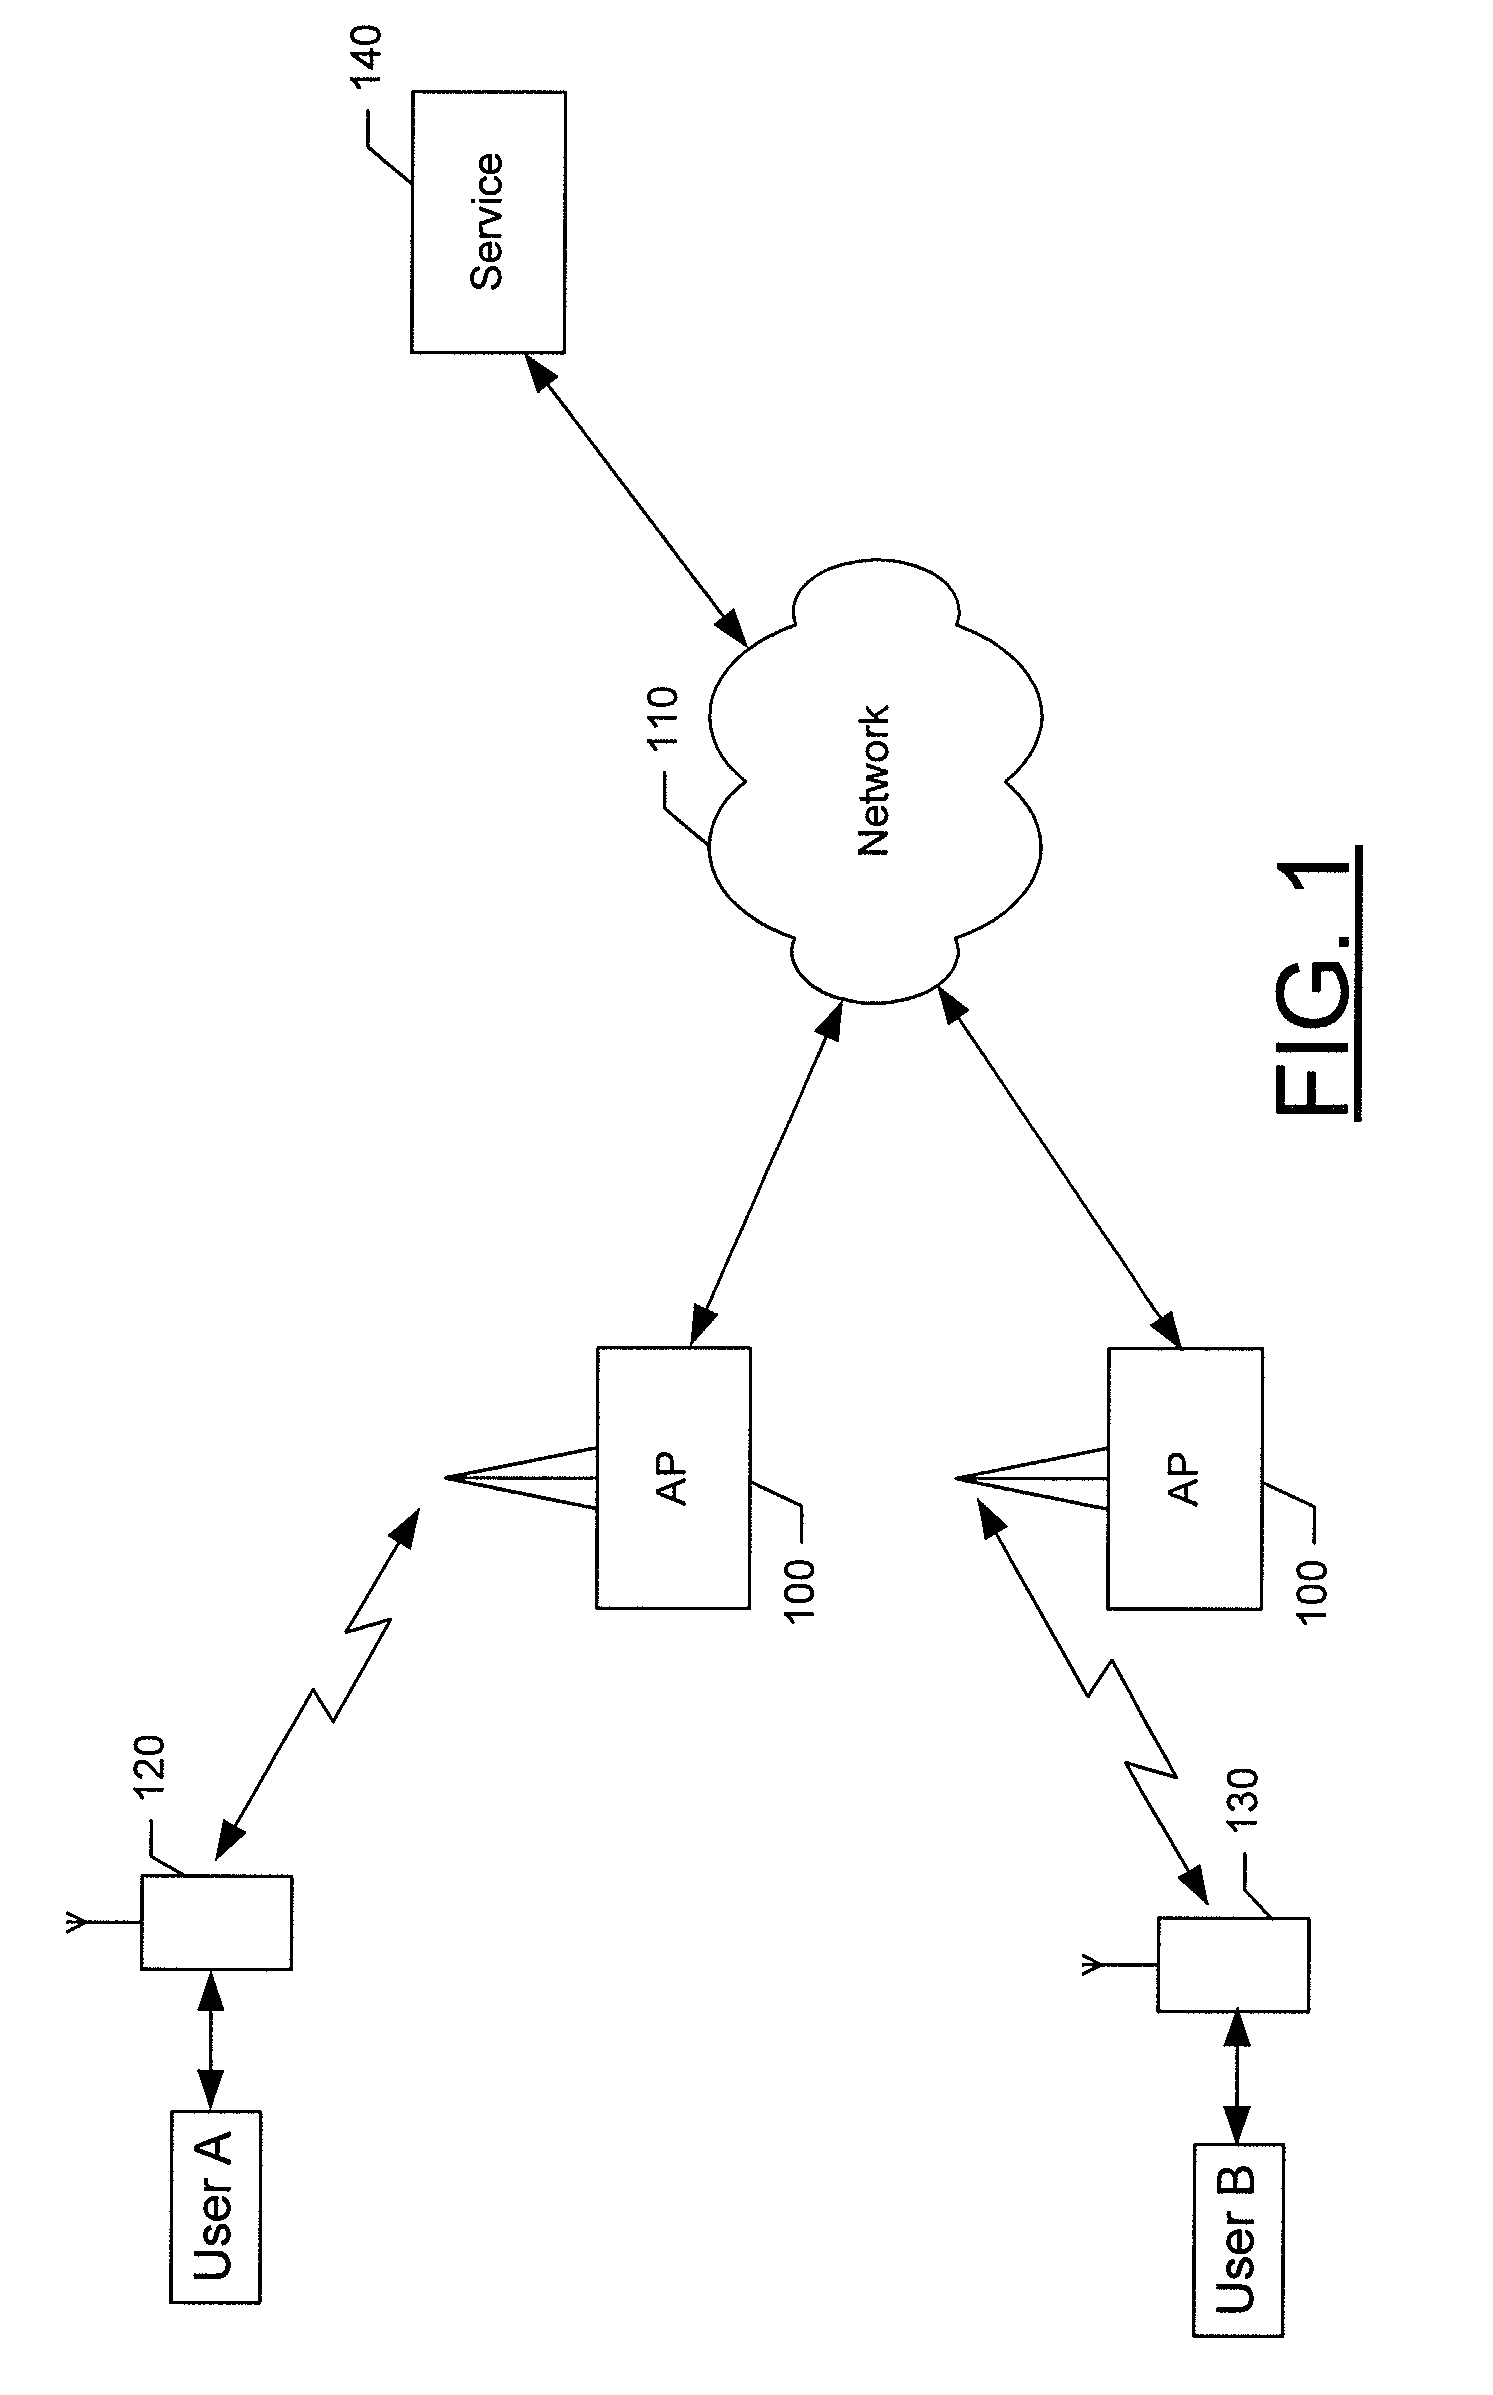 Method, Apparatus, and Computer Program Product for Application-Based Communications